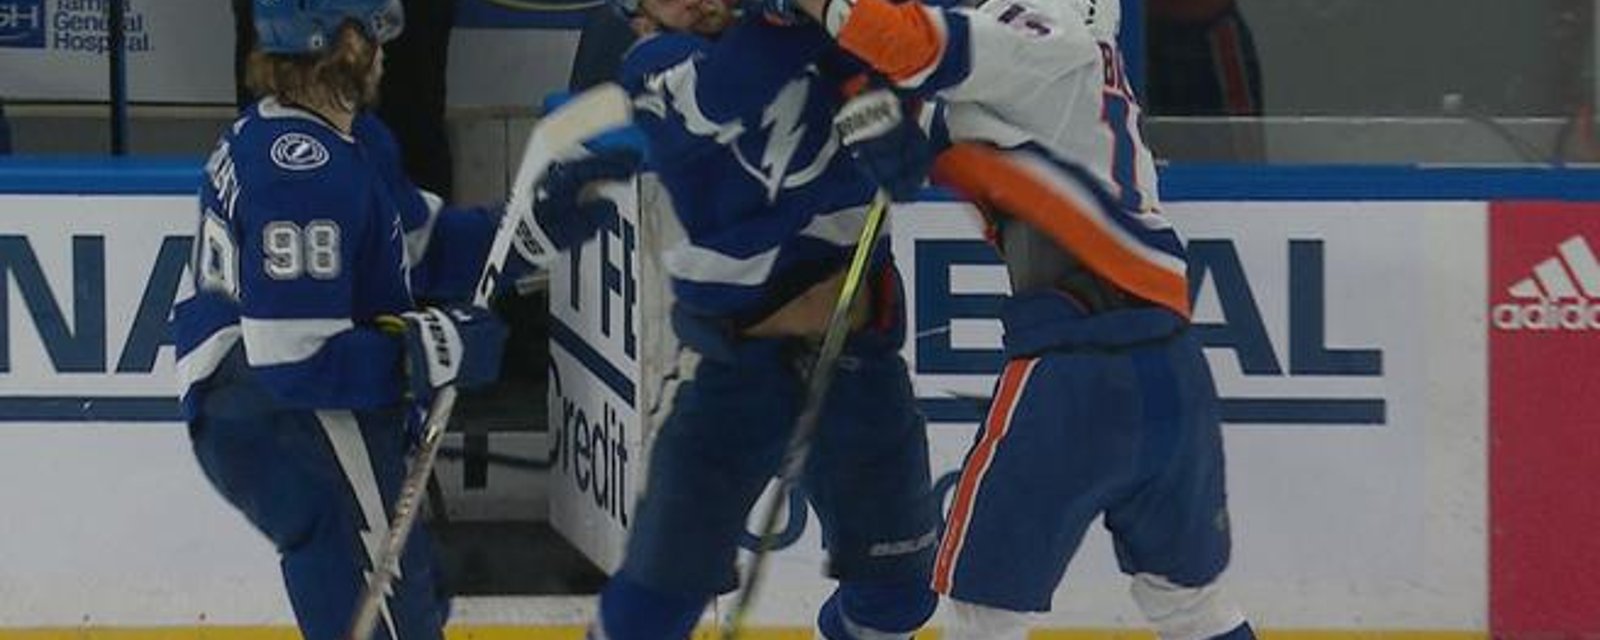 NHL Player Safety comes down on Barzal and fans are quick to react!